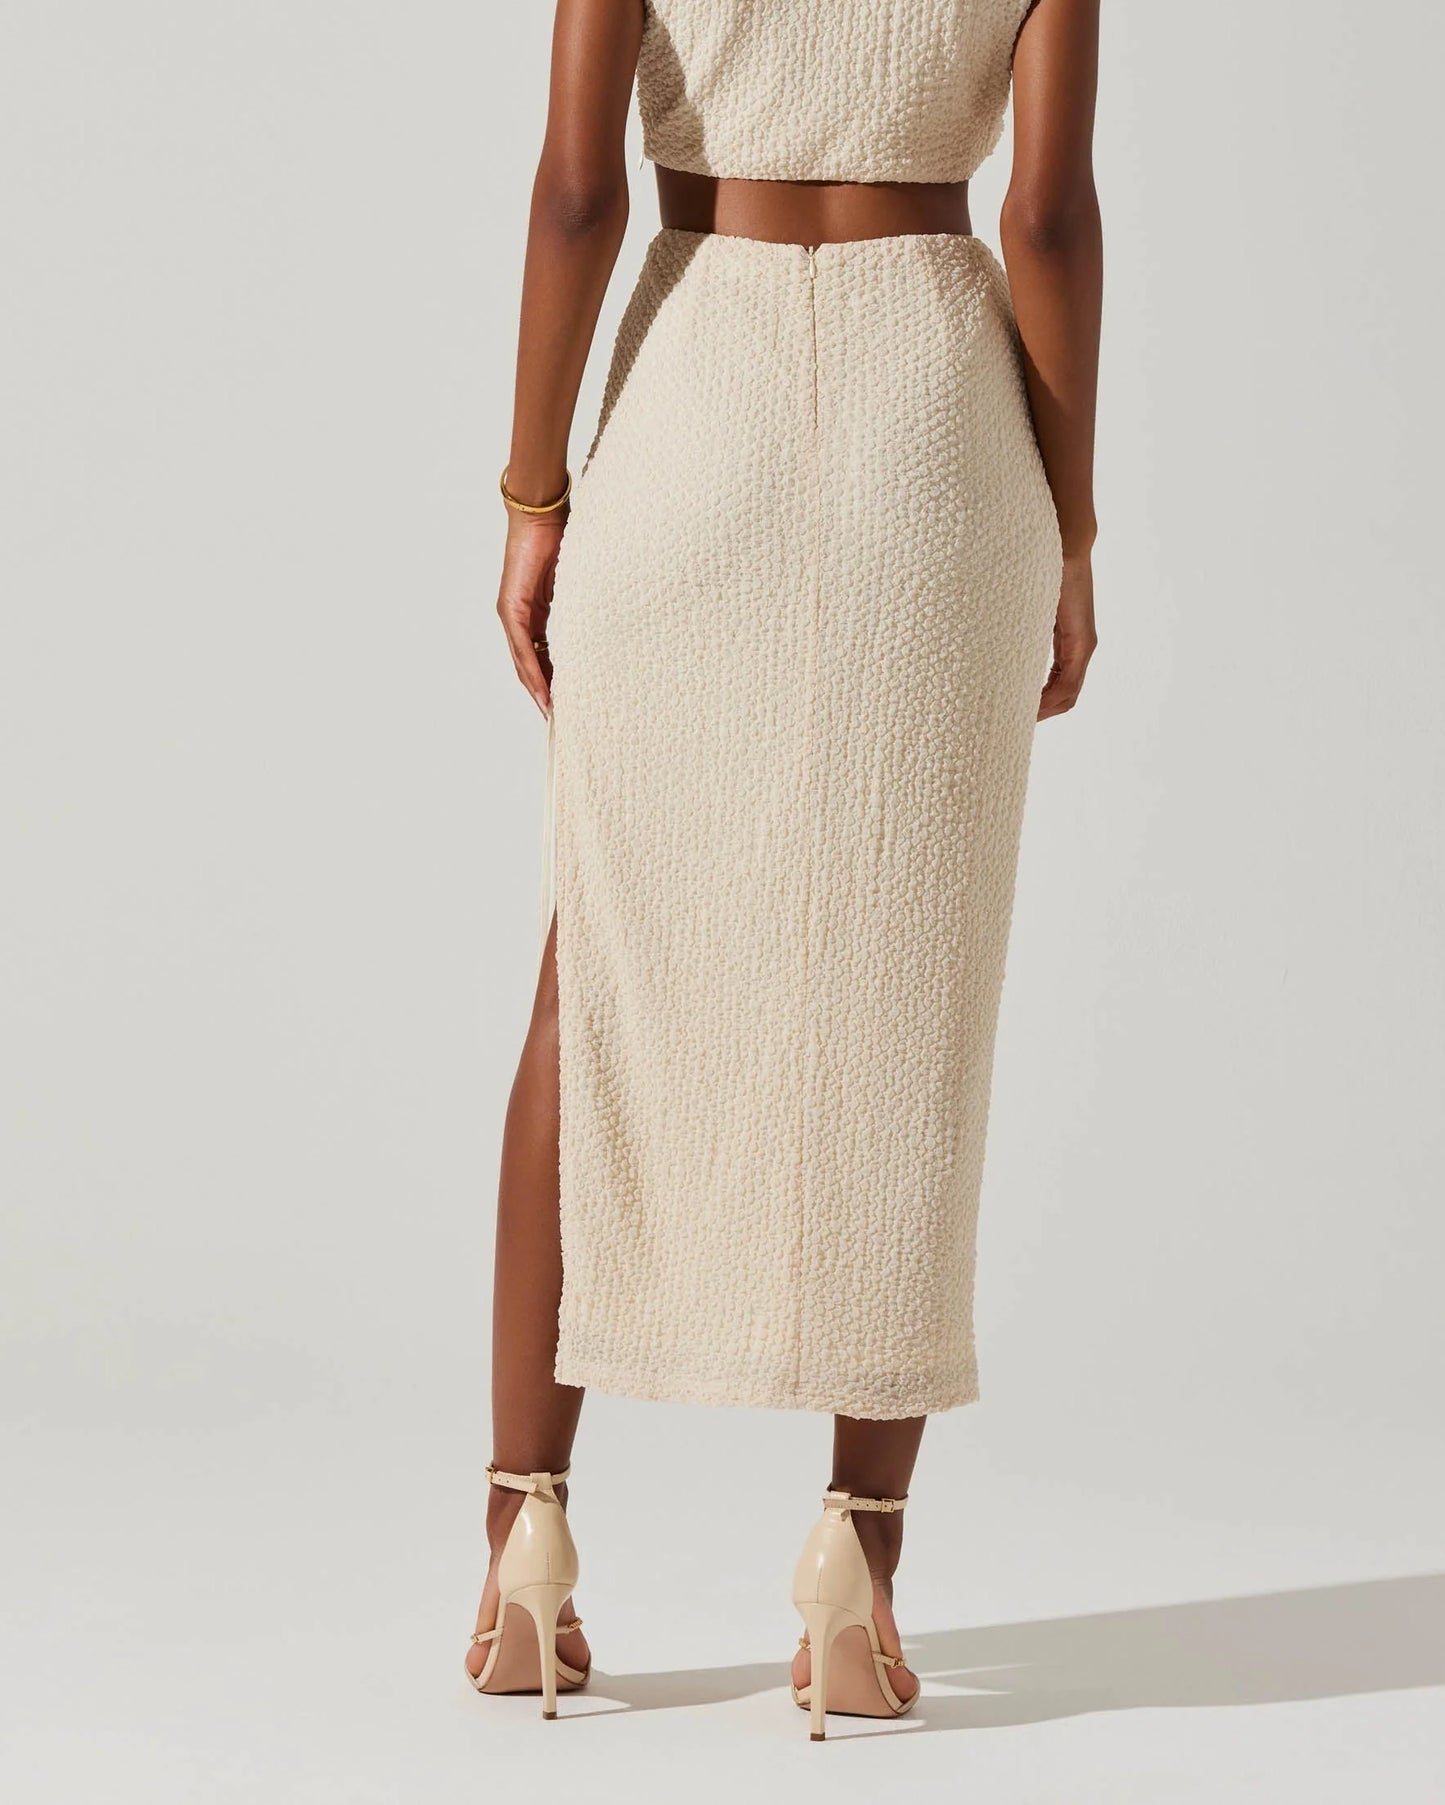 Keely Skirt by ASTR The Label